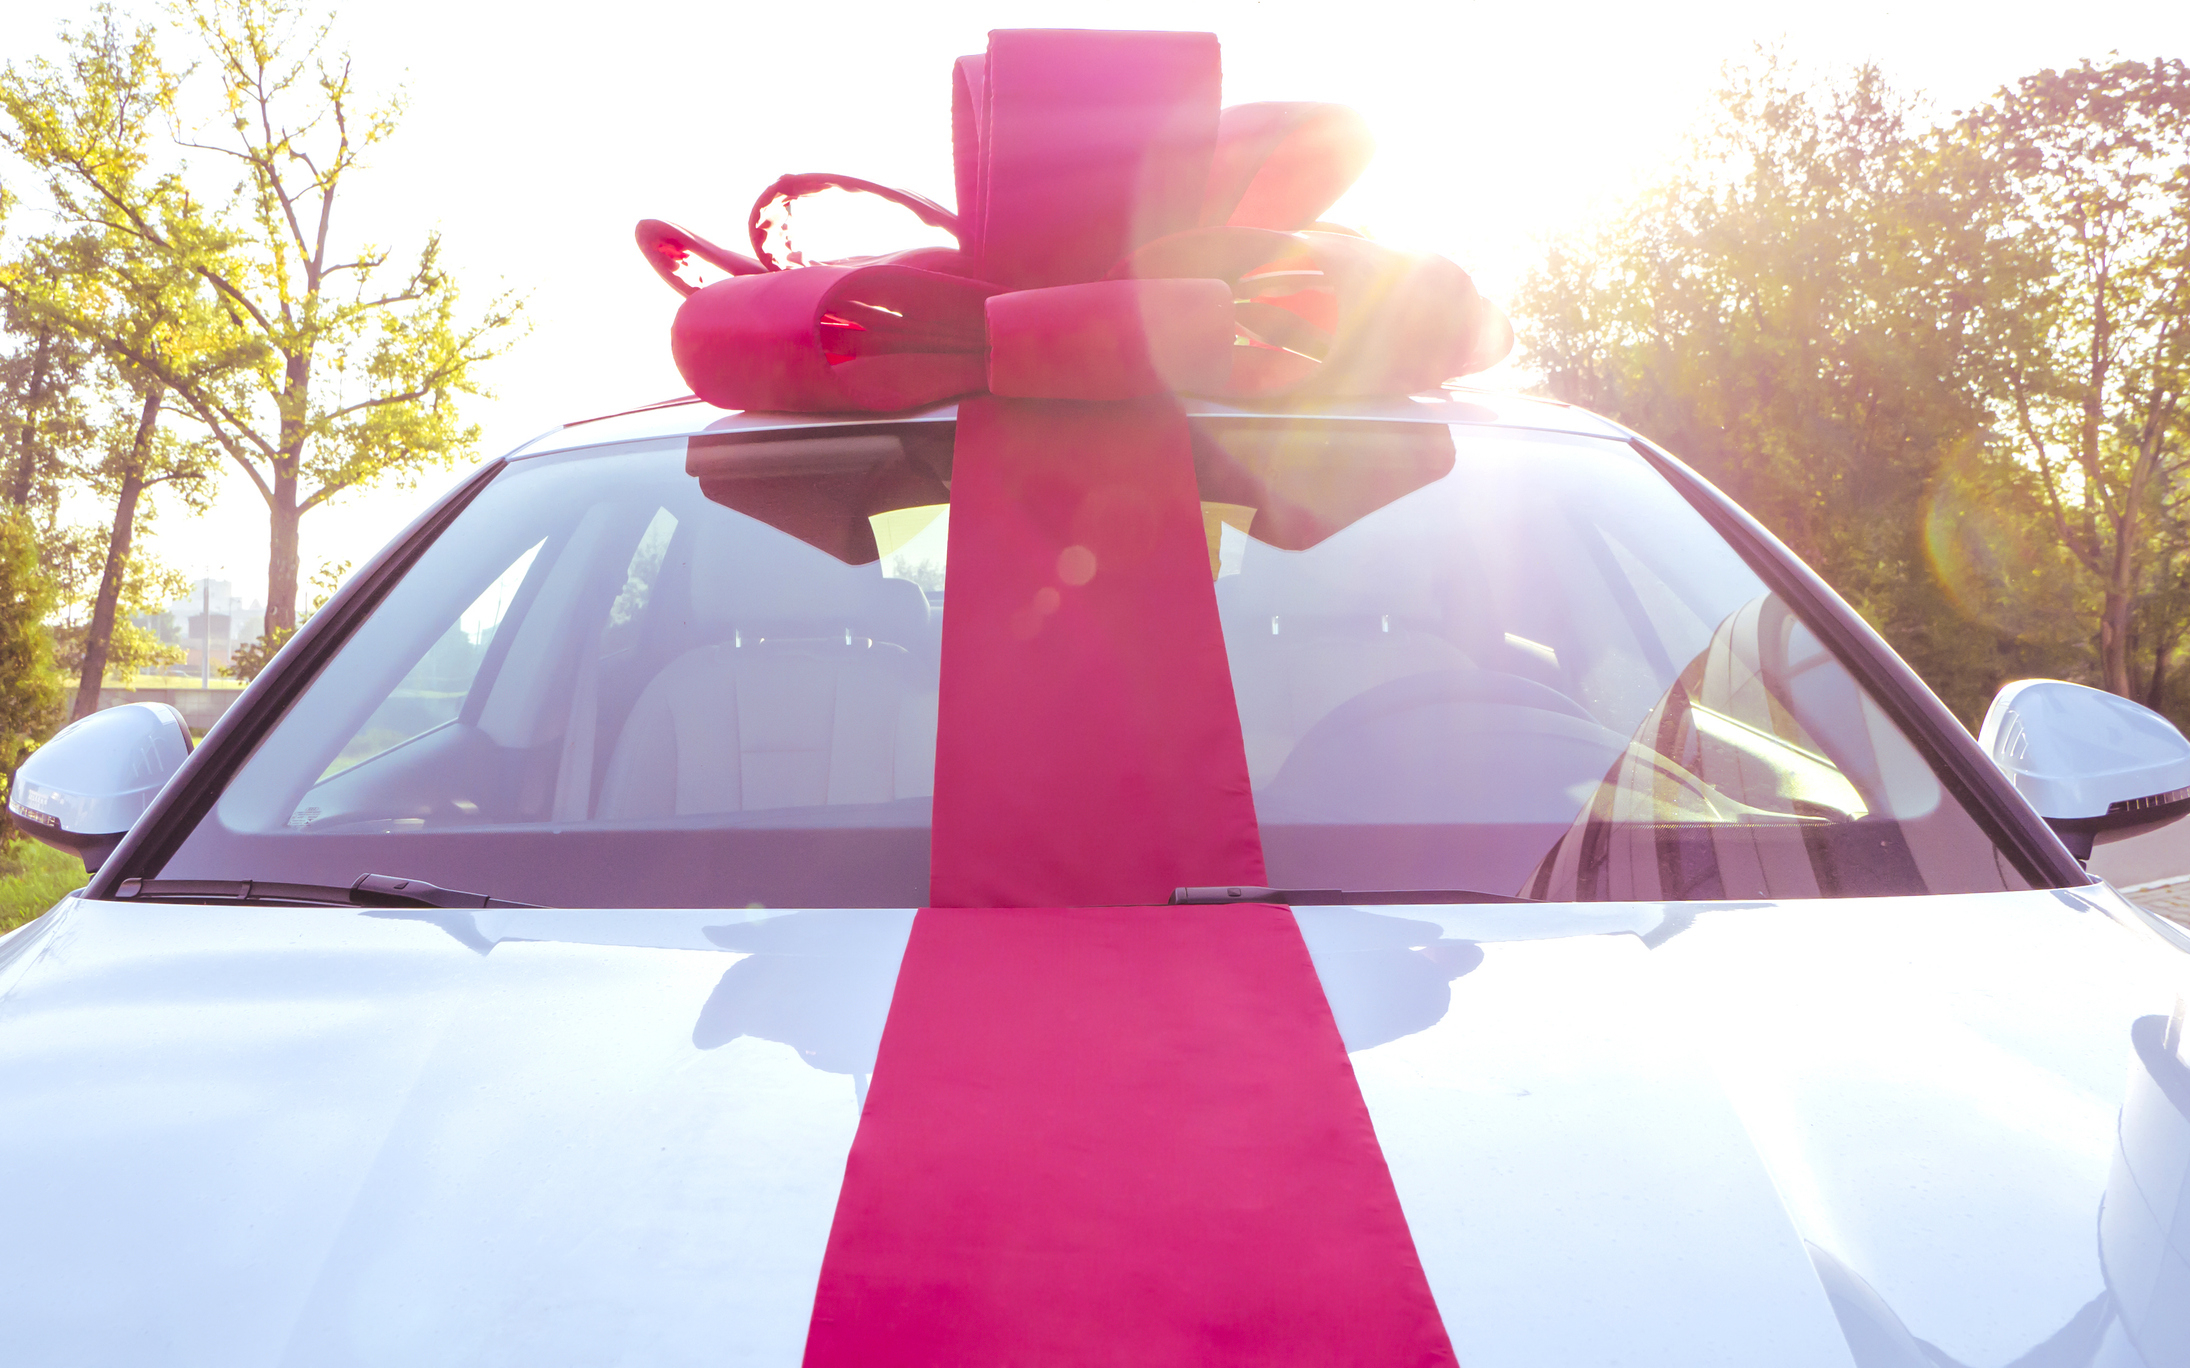 A car with a large red bow on the hood is parked outdoors with trees in the background